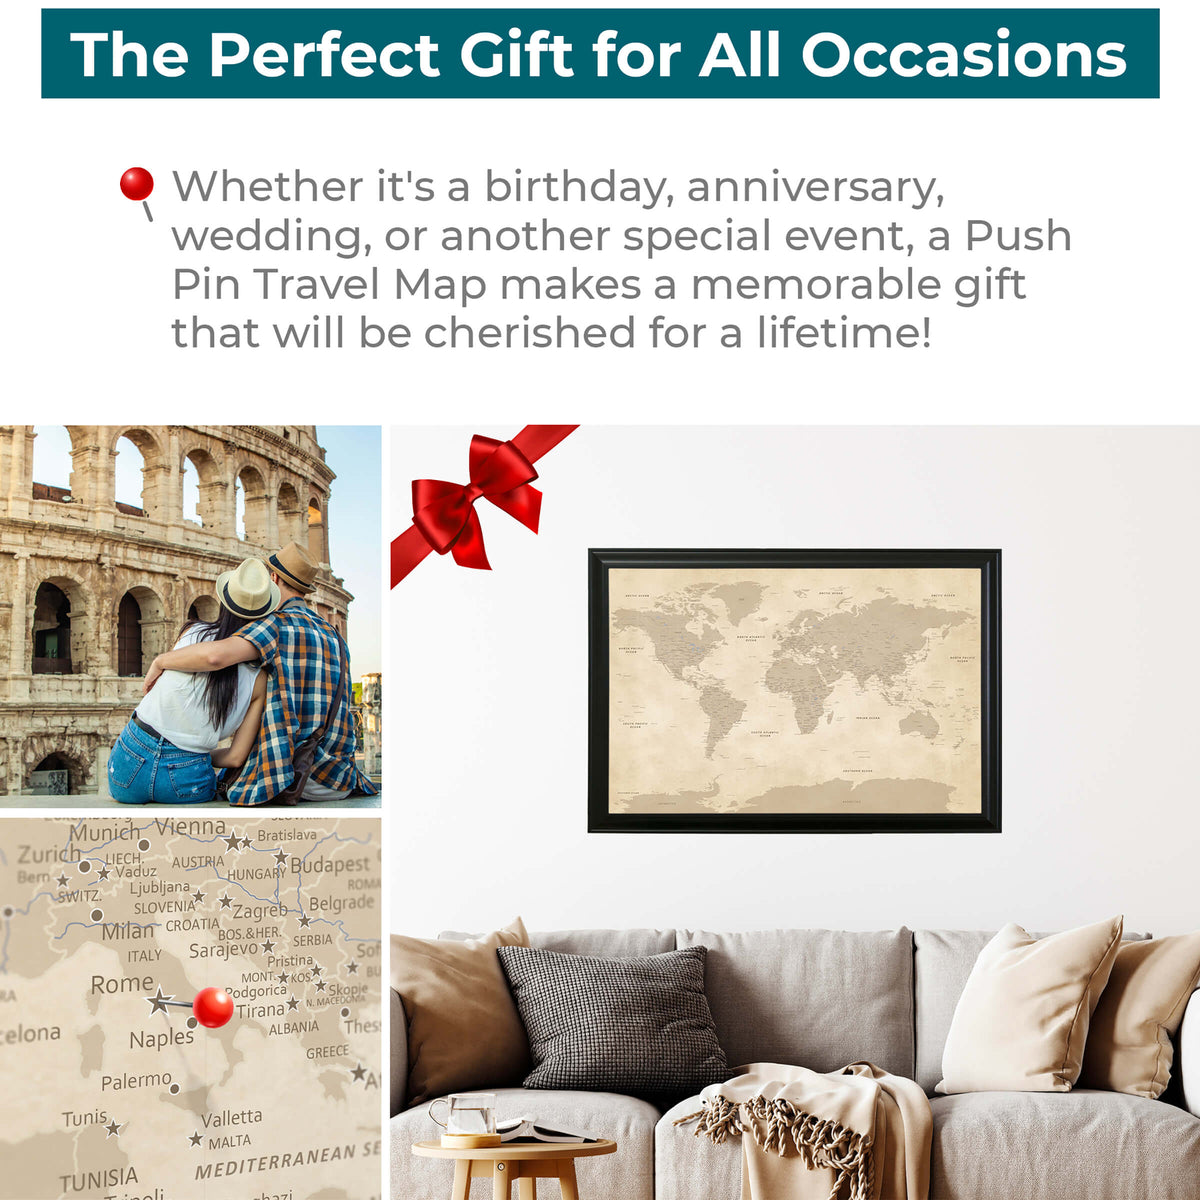 Vintage World Push Pin Travel Maps - The Perfect Gift